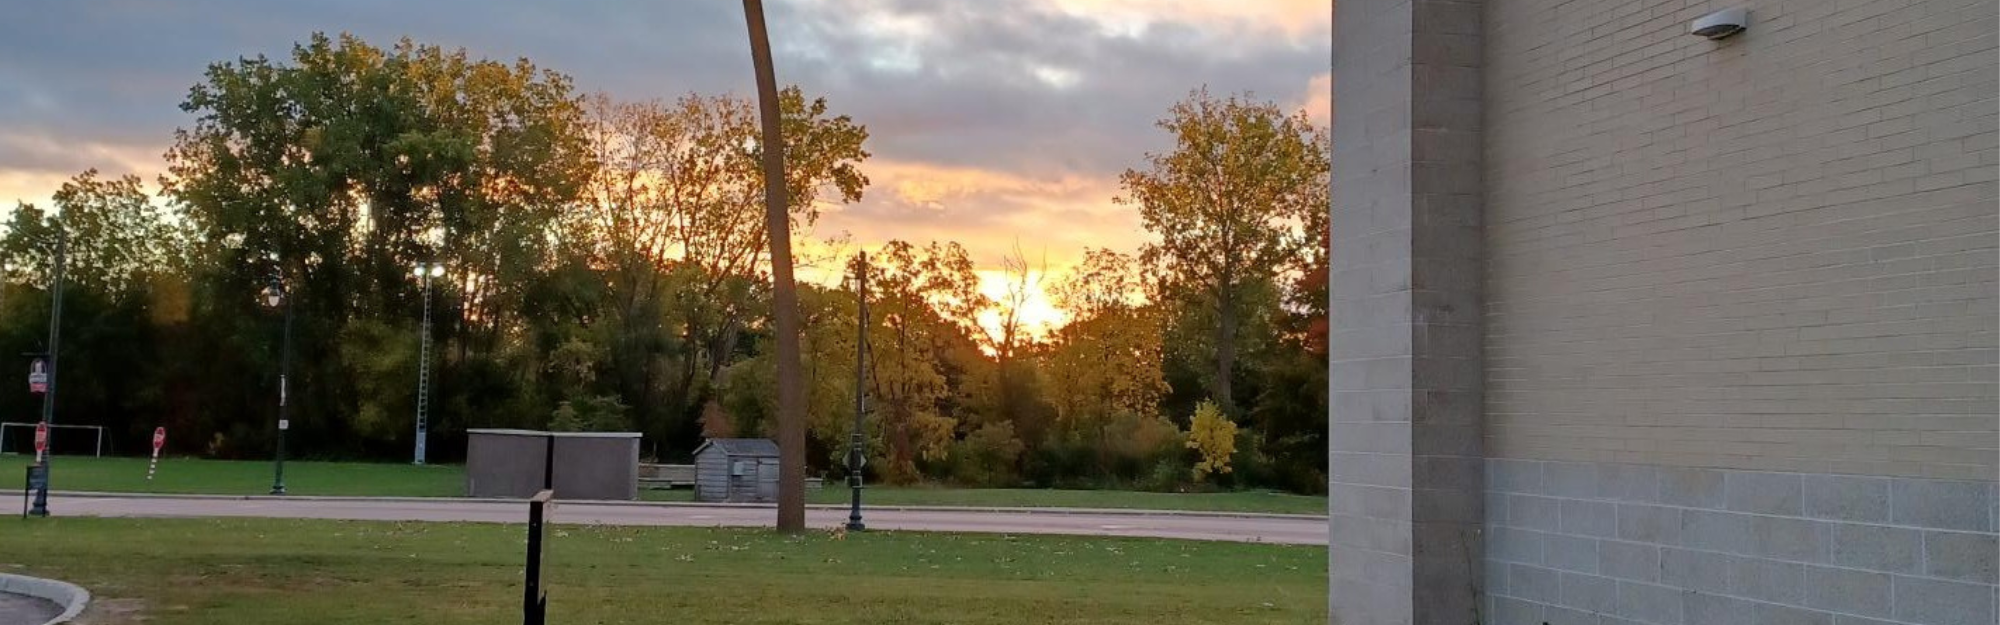 Holiday Hours, Photo of Sunset outside WSRC